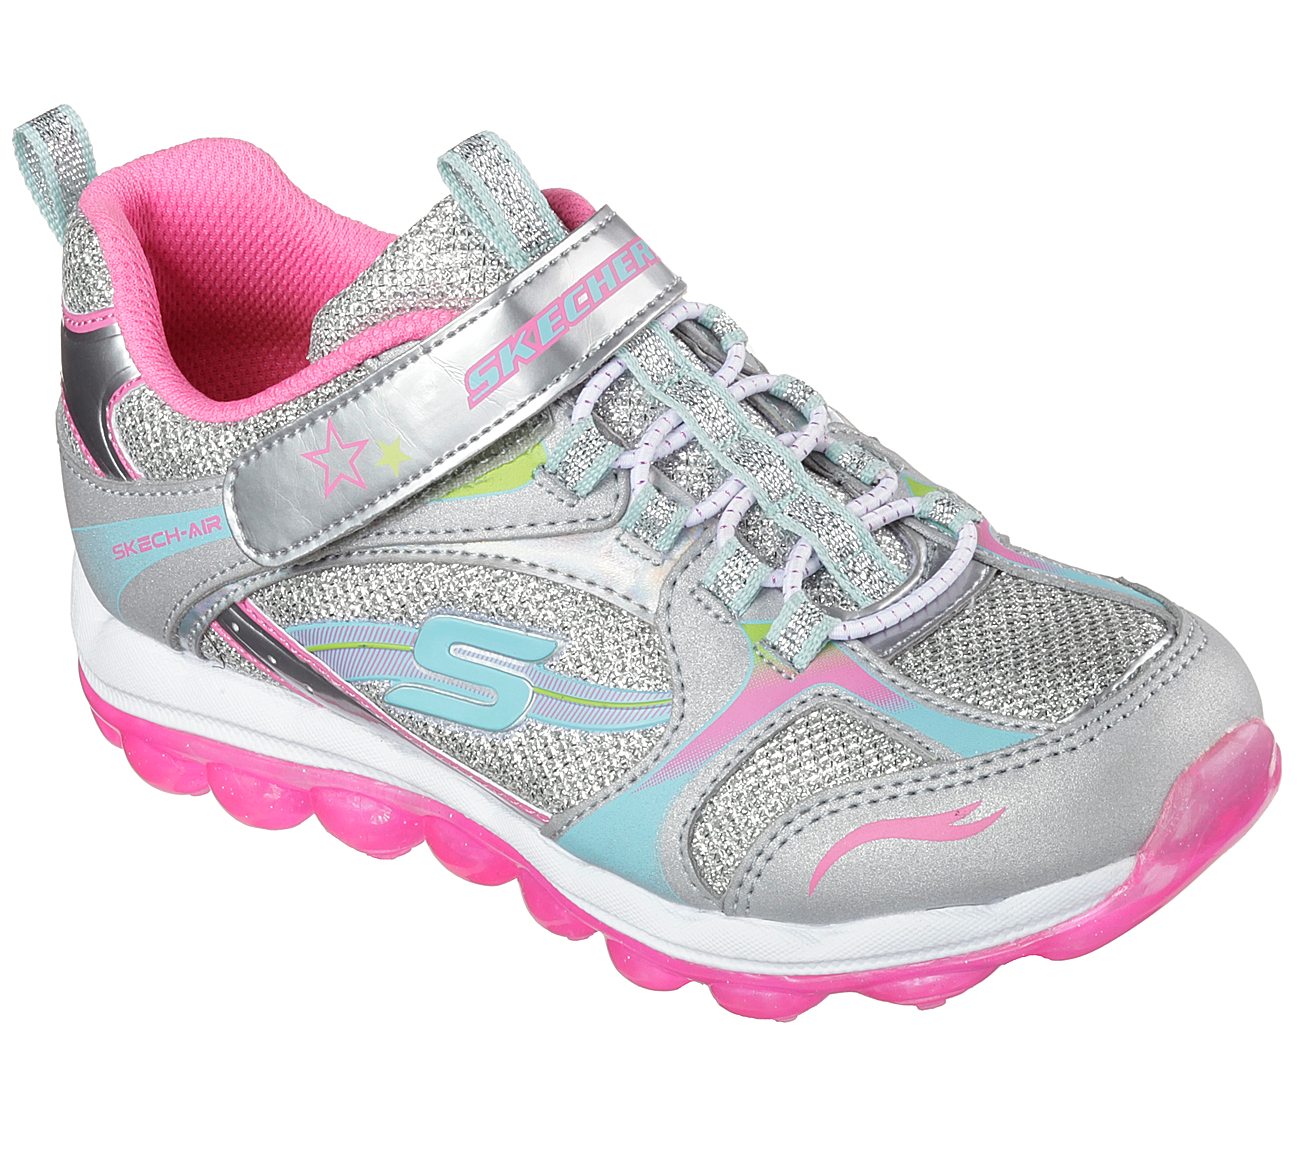 skechers with bubbles on bottom online -